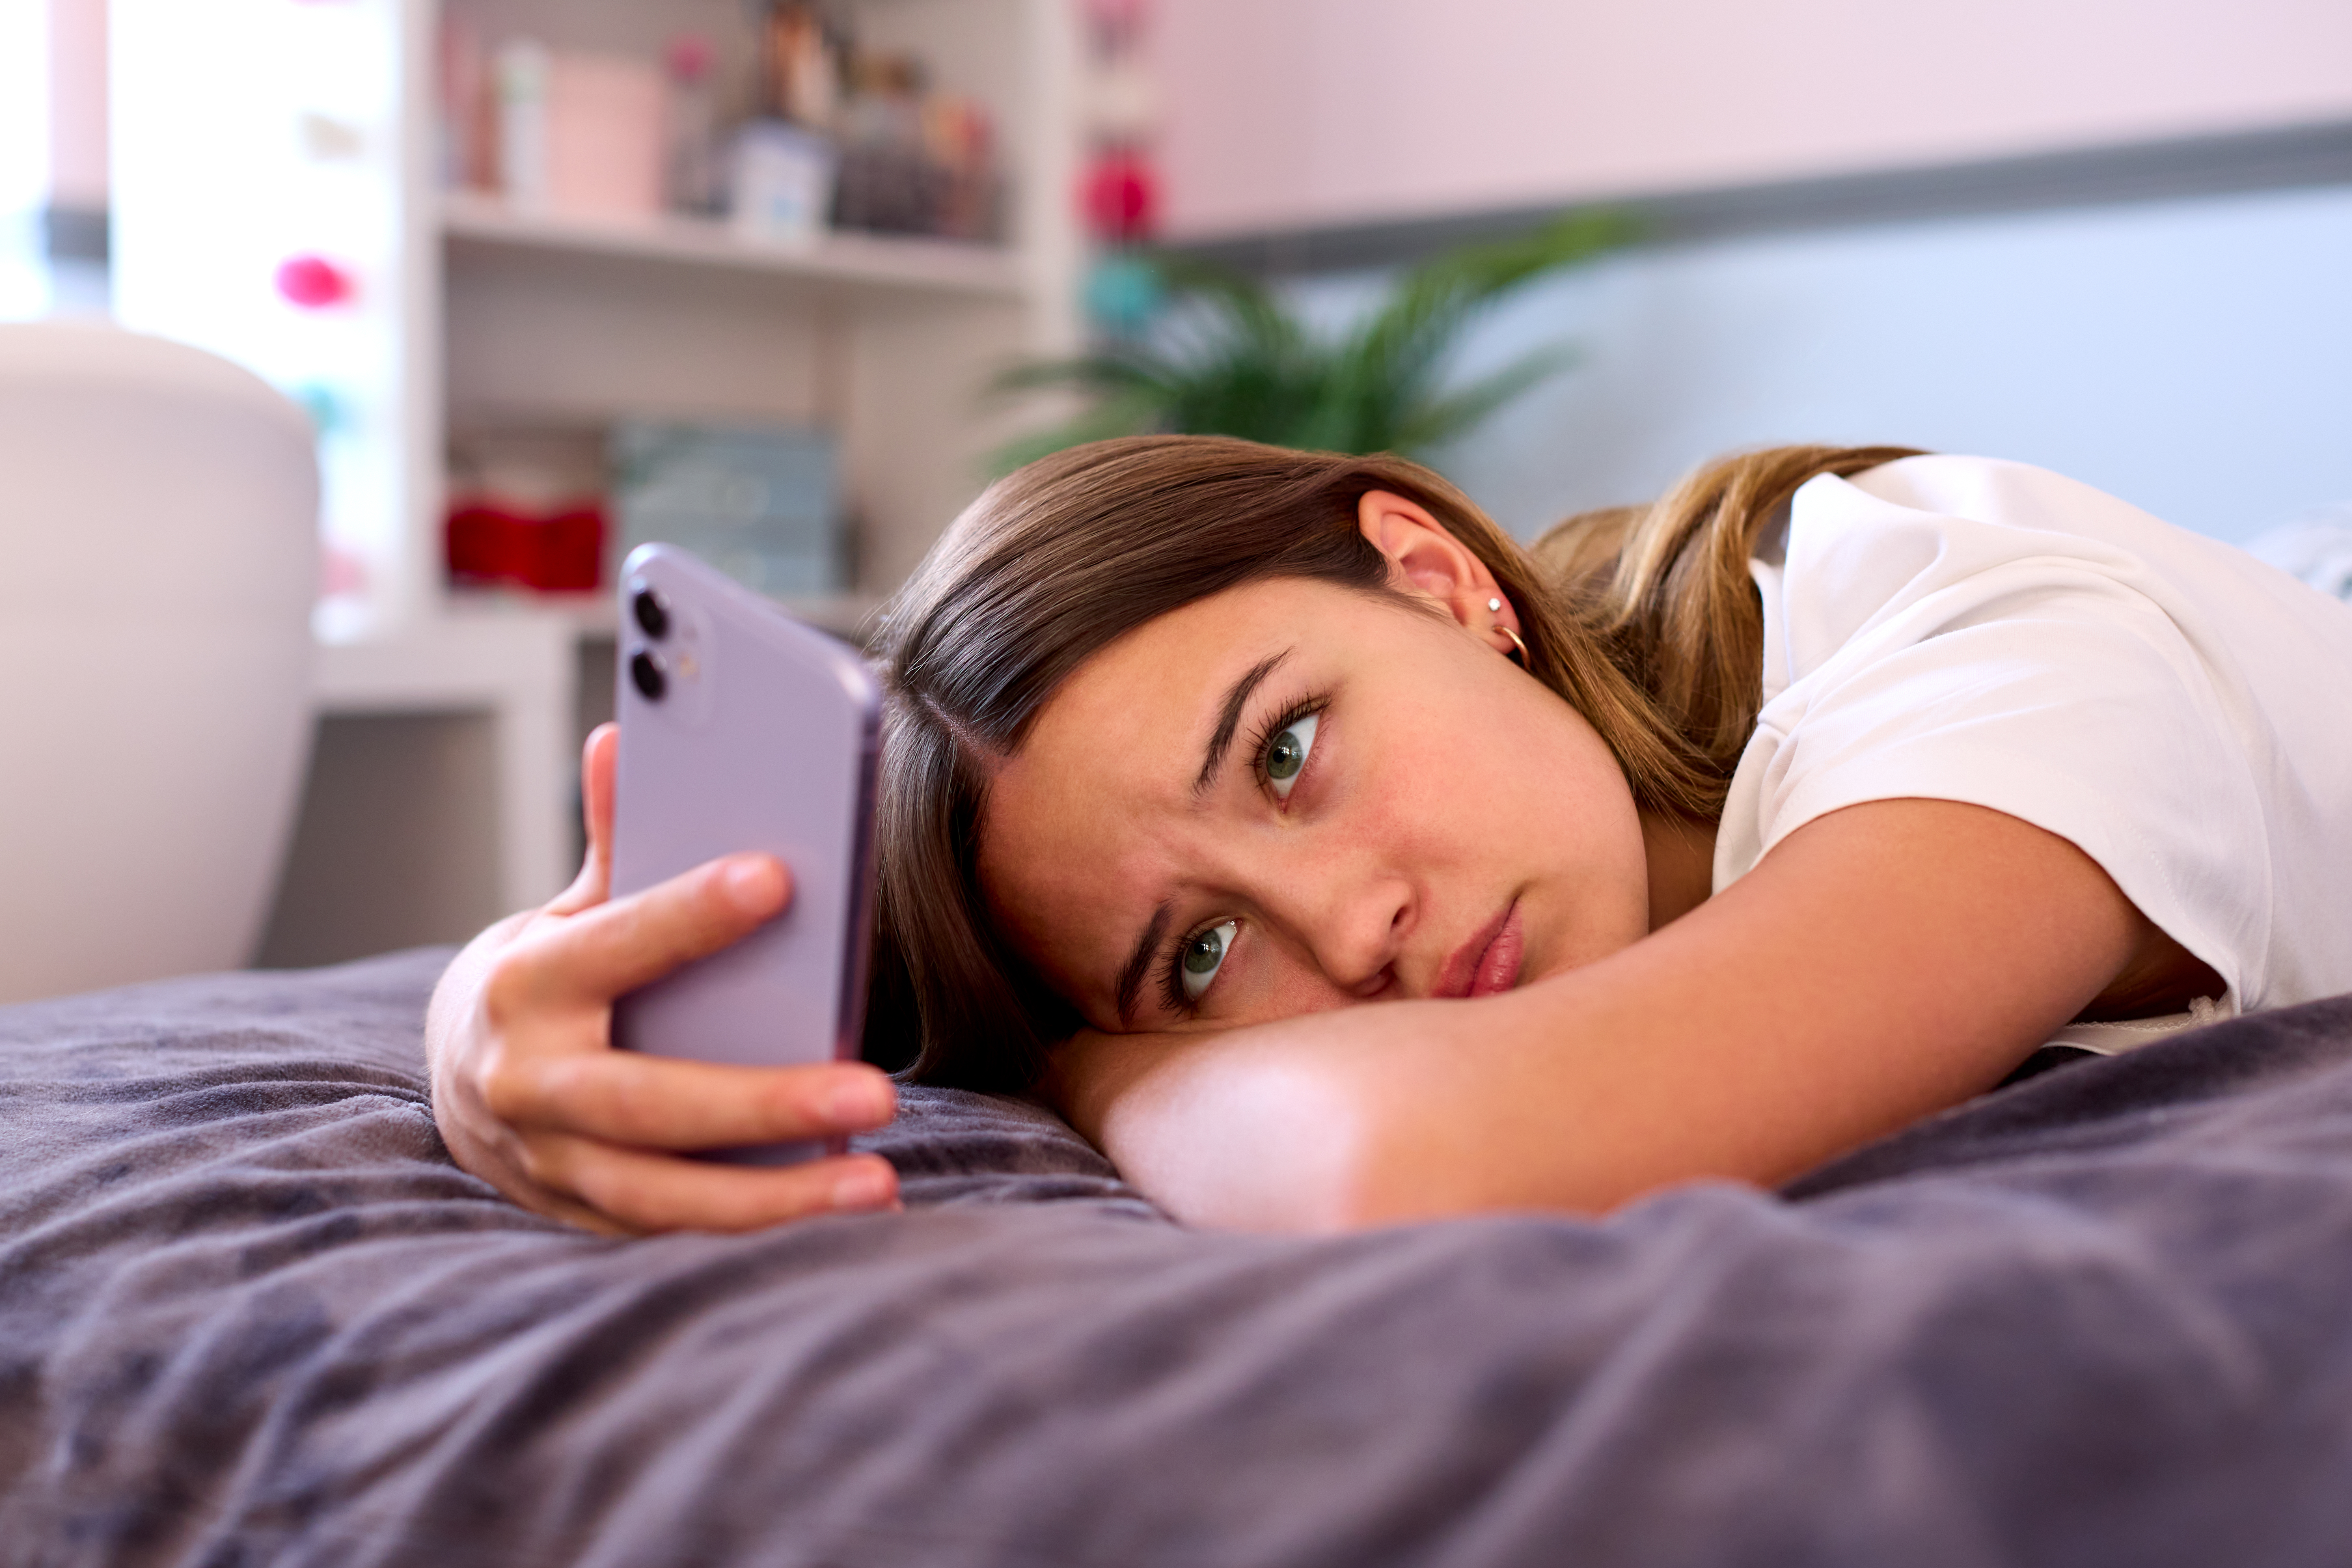 Depressed Teenage Girl Lying On Bed At Home Looking At Mobile Phone | Source: Getty Images